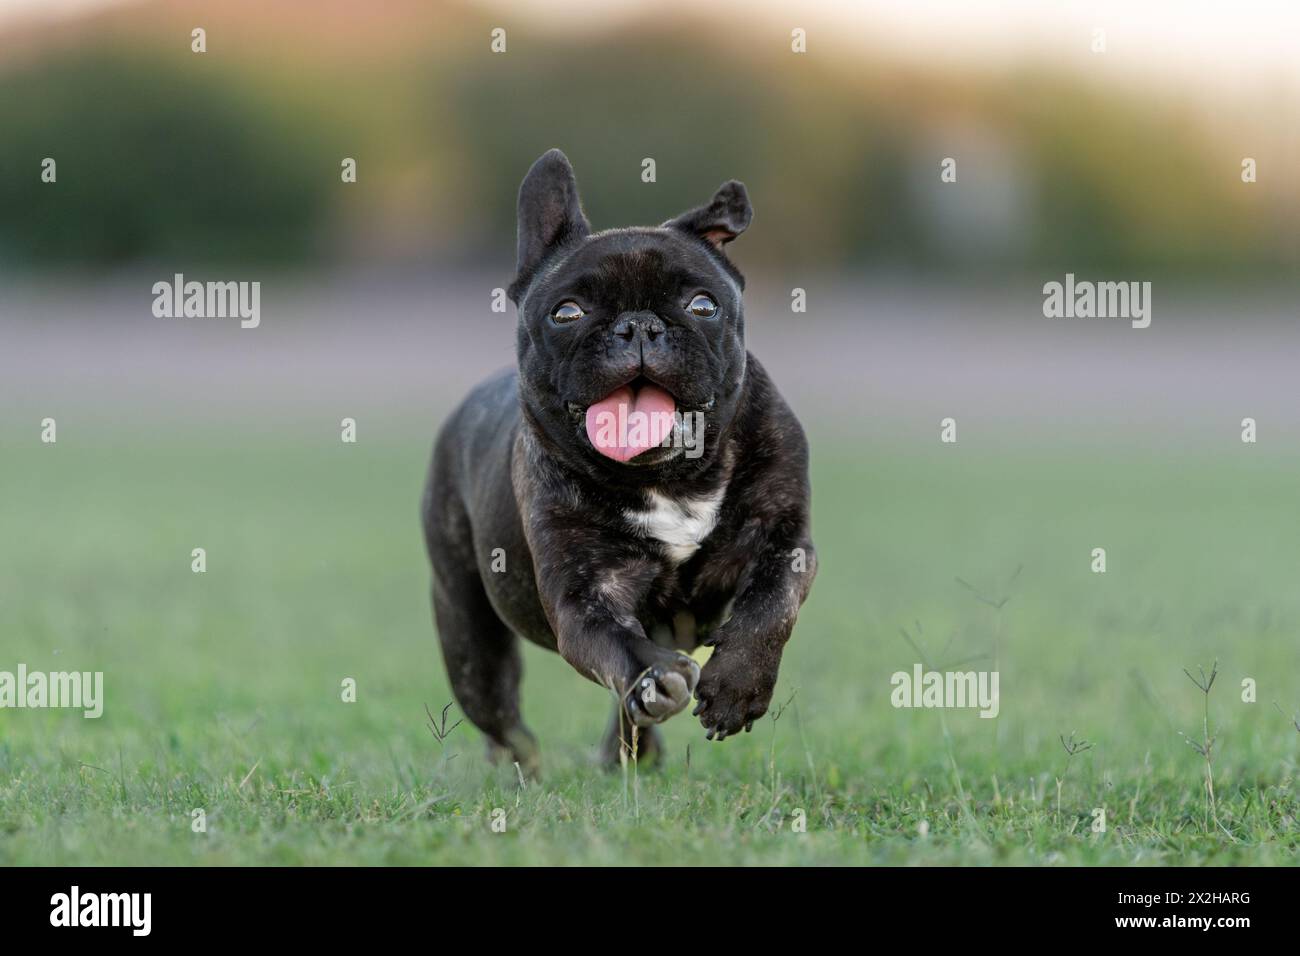 Close up photo of a French bulldog running in the grass and smiling Stock Photo